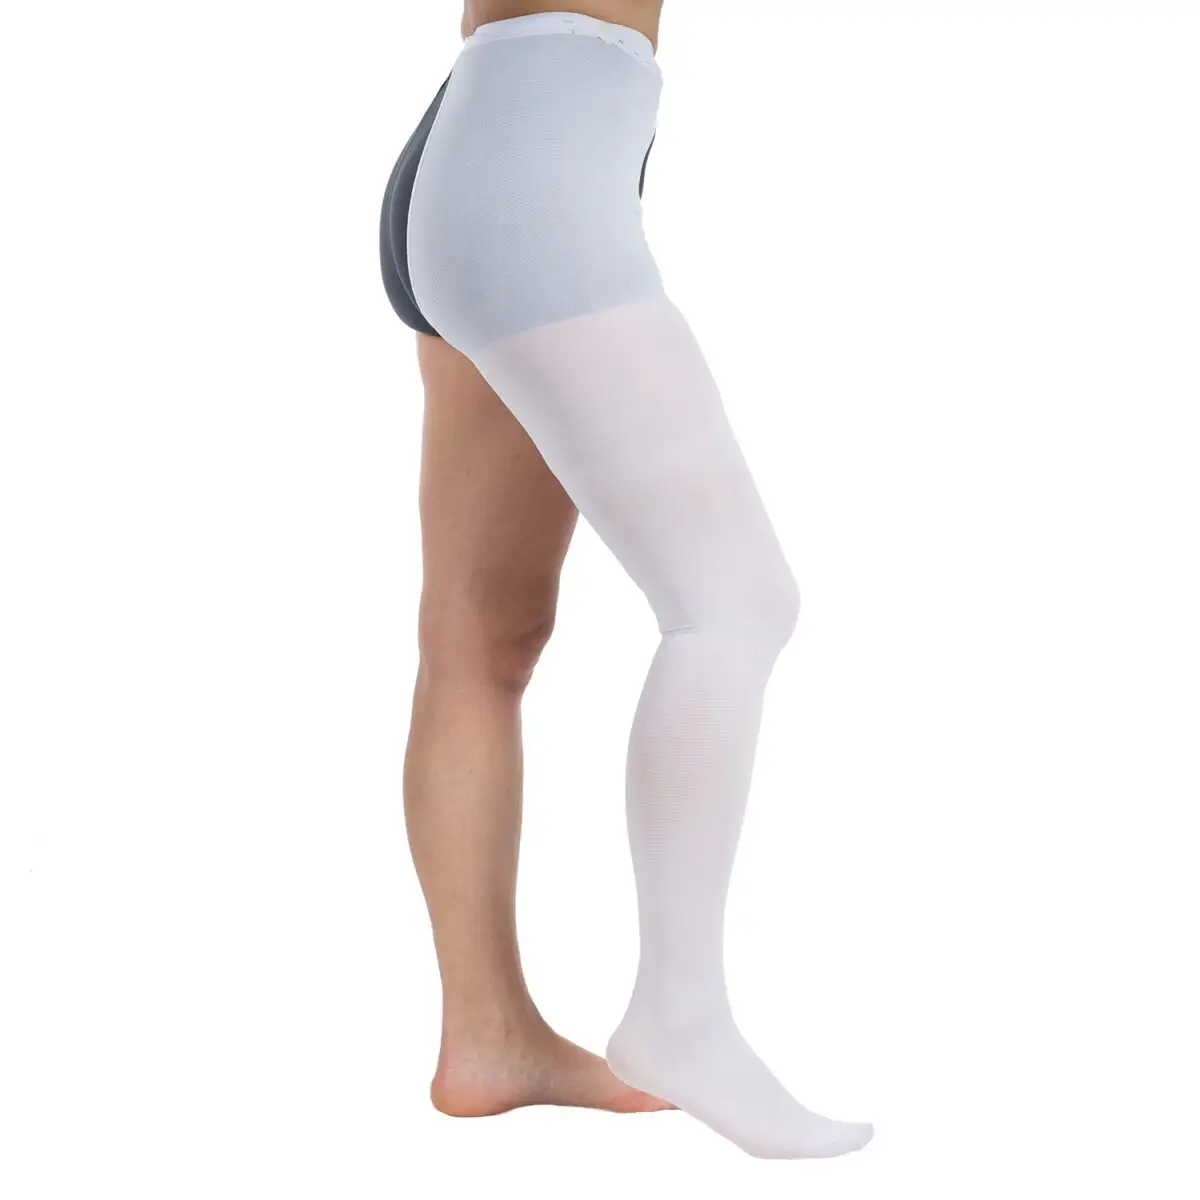 Orione Anti-Embolism Stockings - Thigh Length With Belt L-Regular